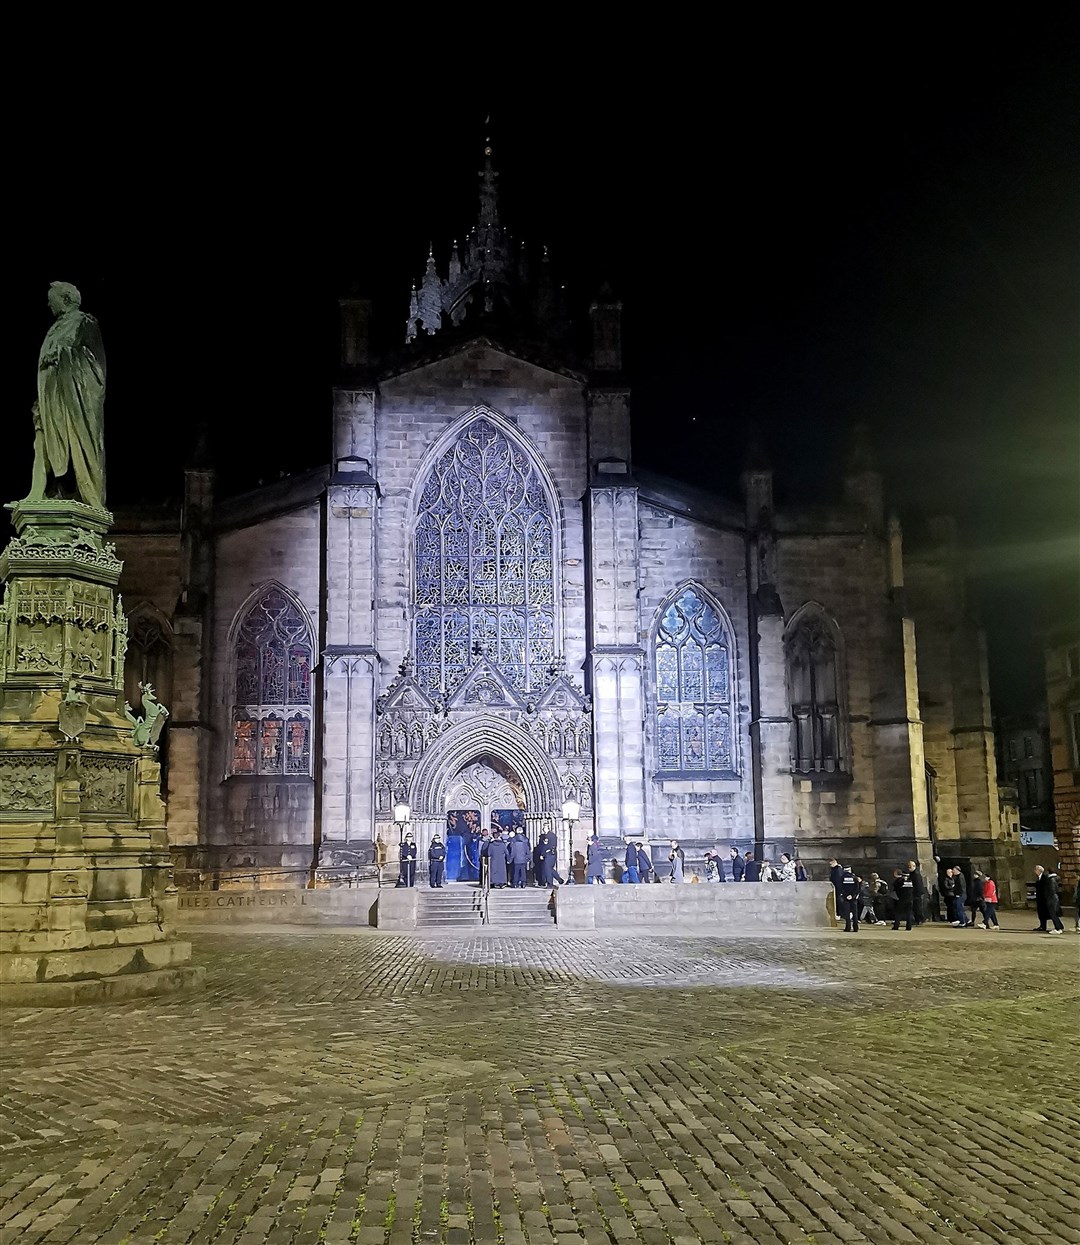 Mourners queued overnight to pay their respects to the Queen at St Giles’s Cathedral in Edinburgh (Mitch Stevenson/PA)